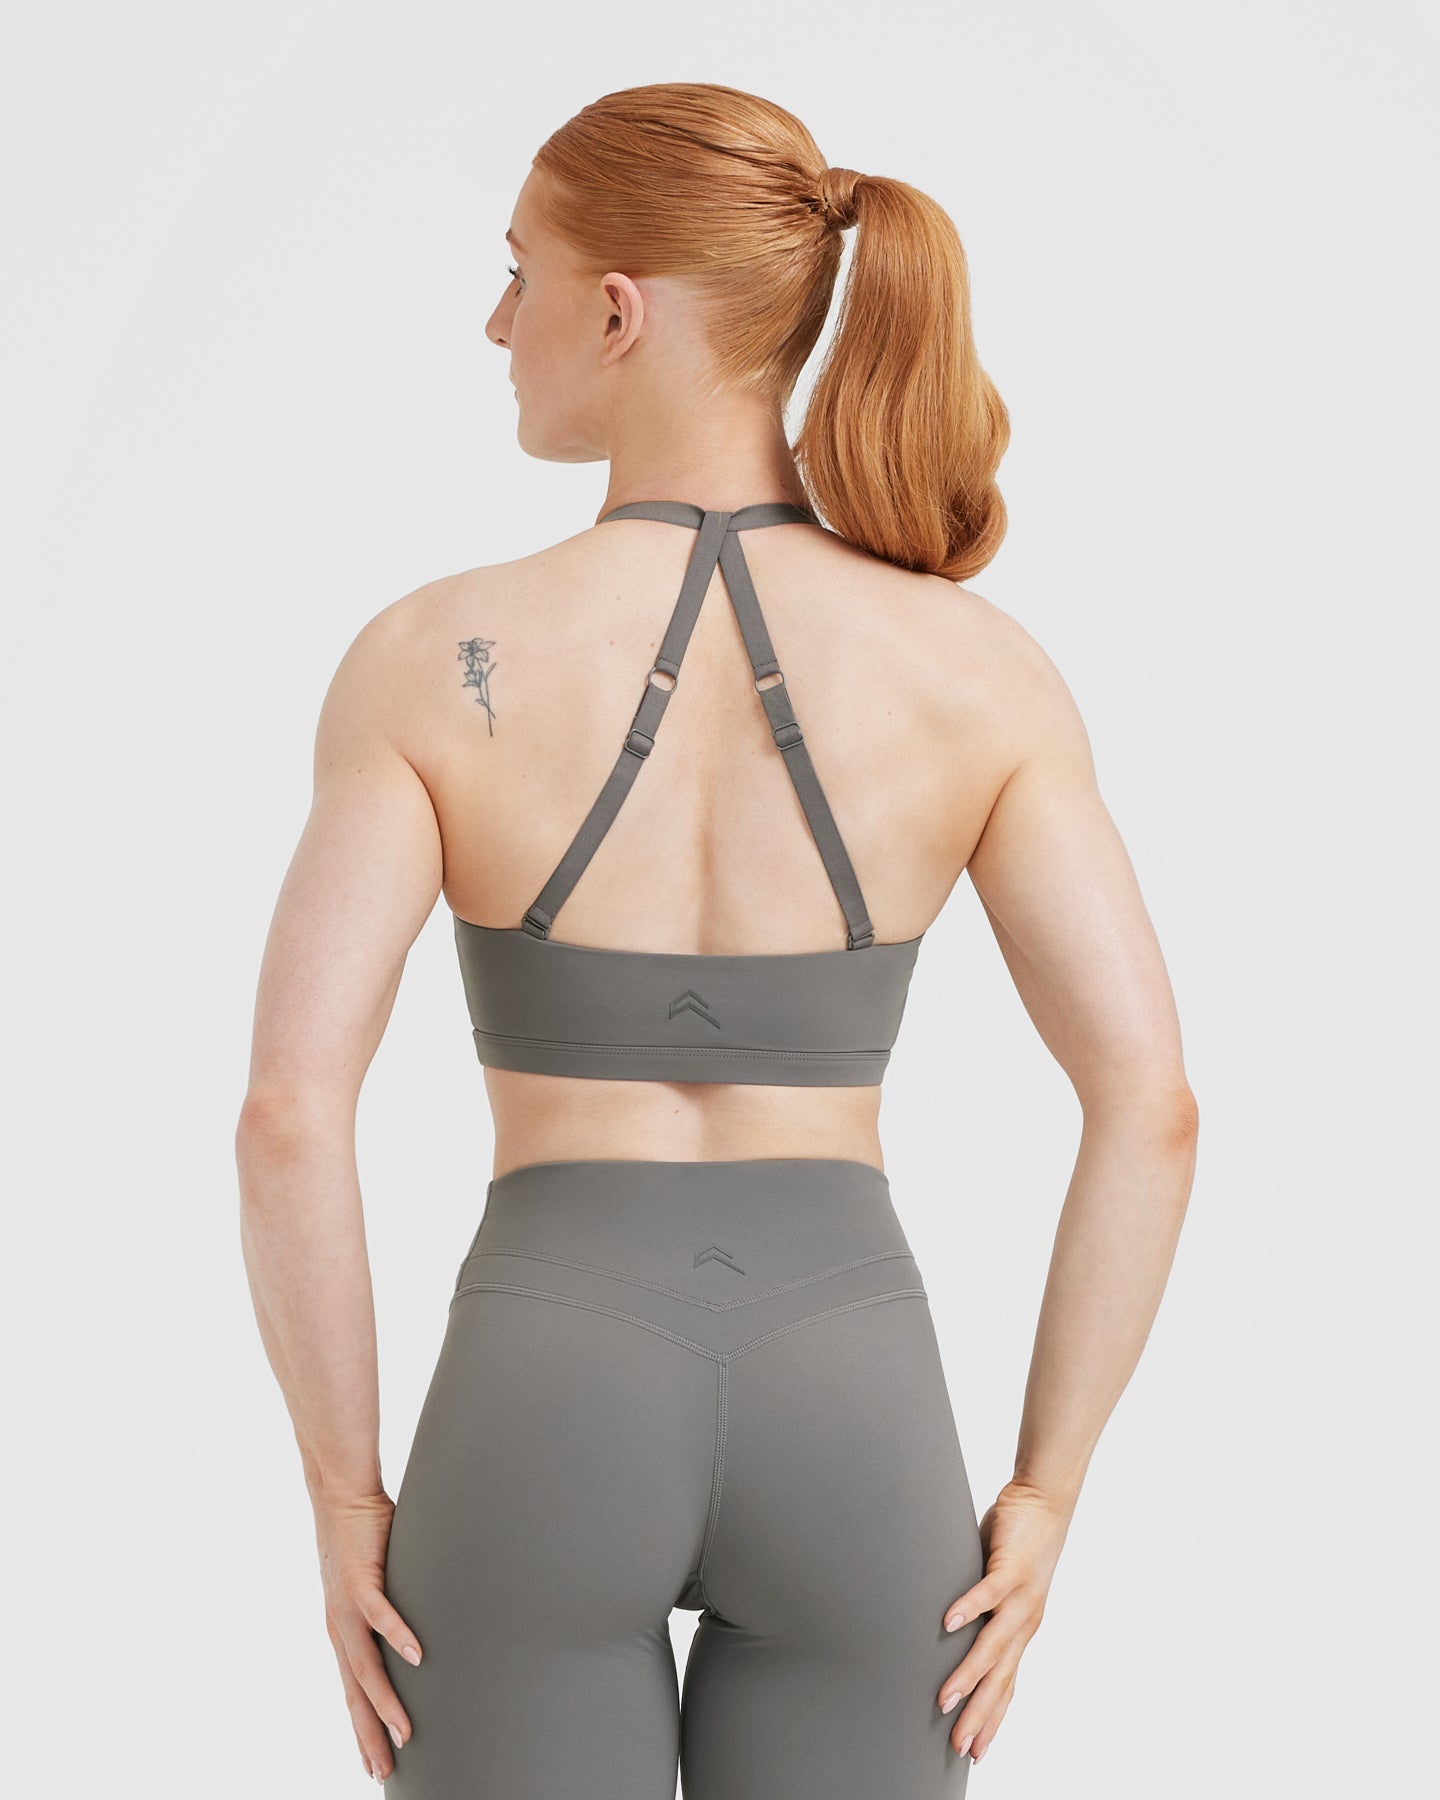 AND Blue Sports Bra With Razer Back [SS19ATHAND11, L]